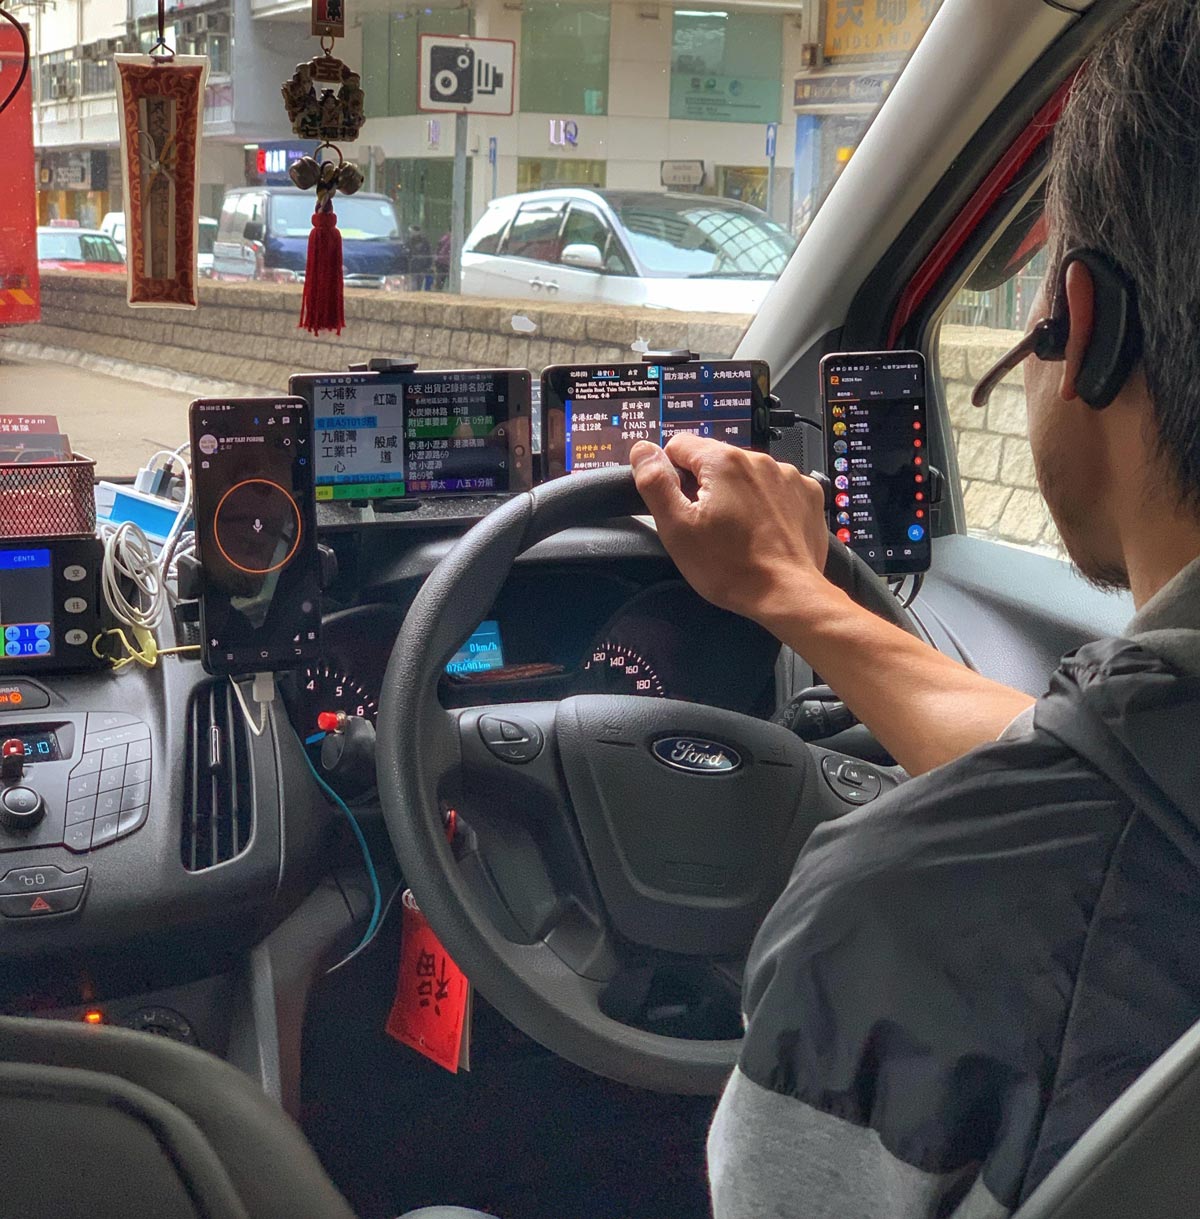 My cab driver in Hong Kong plays Scrabble and controls the Hubble while getting me to the airport